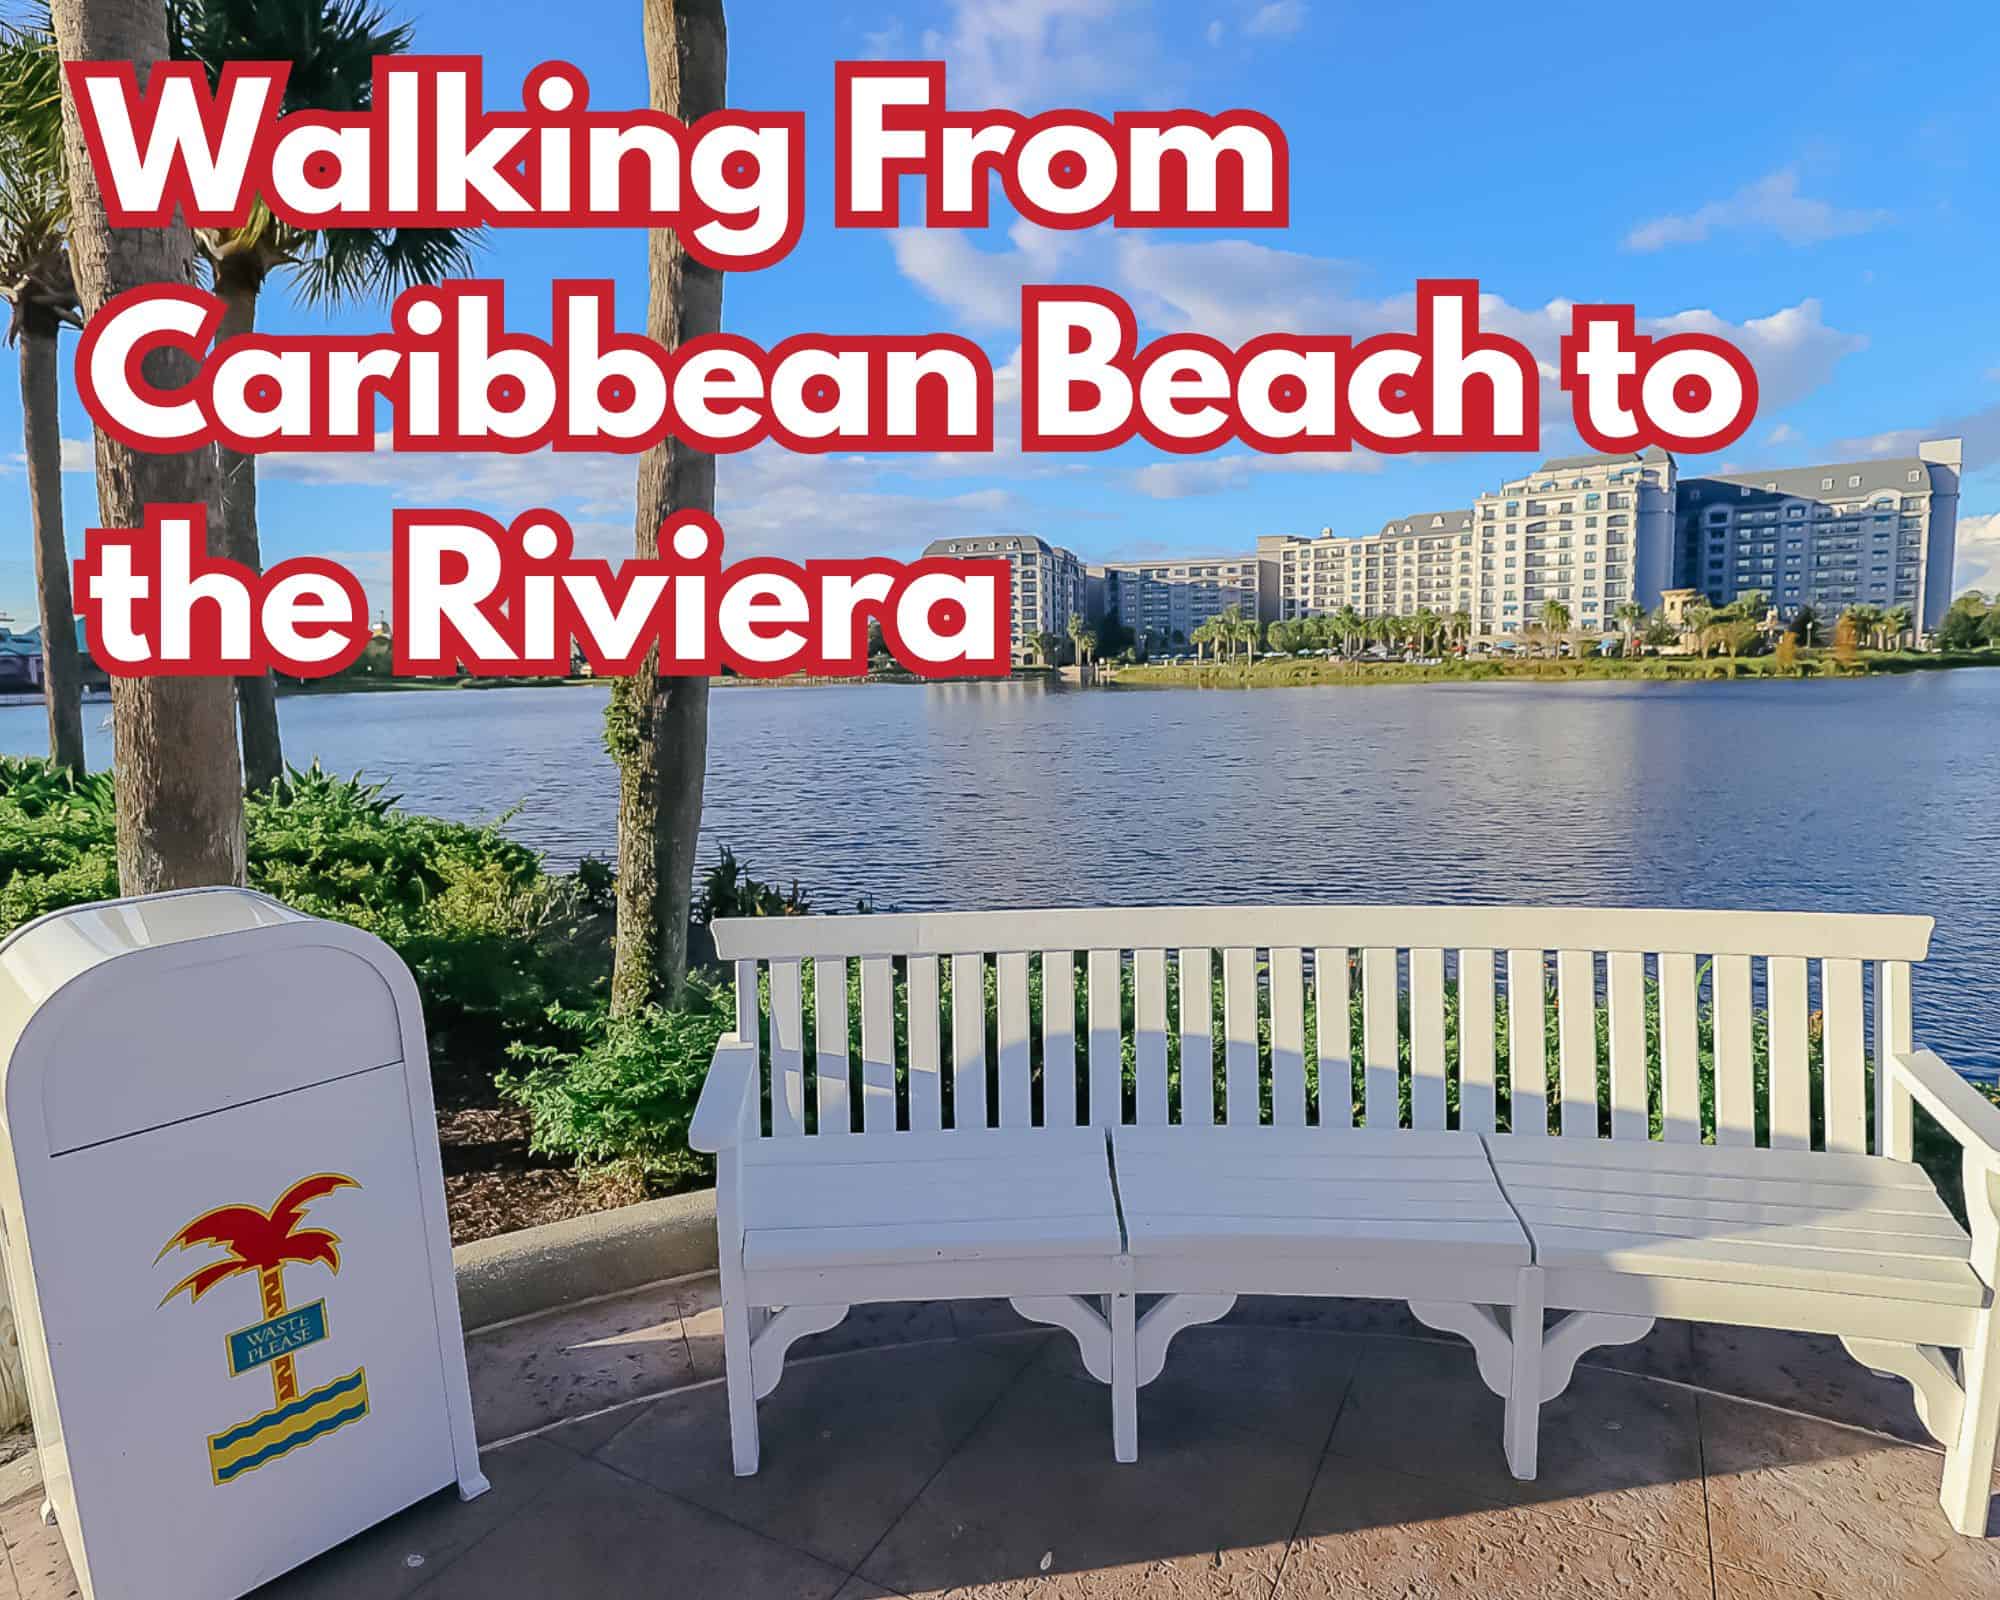 Walking From Disney’s Caribbean Beach to the Riviera Resort For Dining is a Sure Thing